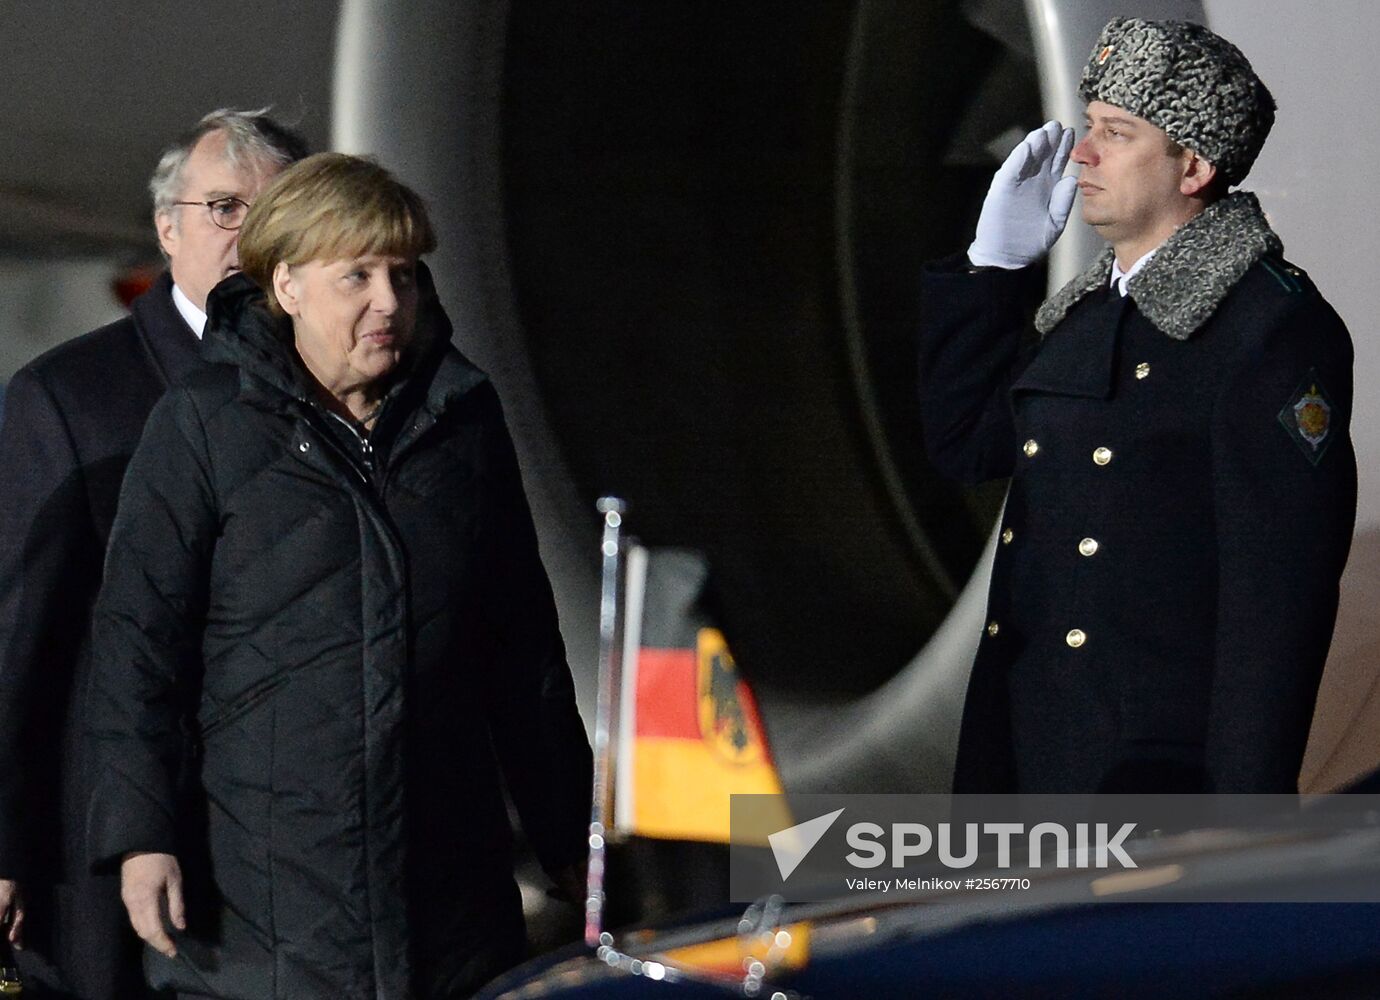 German Chancellor Angela Merkel and French President Francois Hollande arrive in Moscow